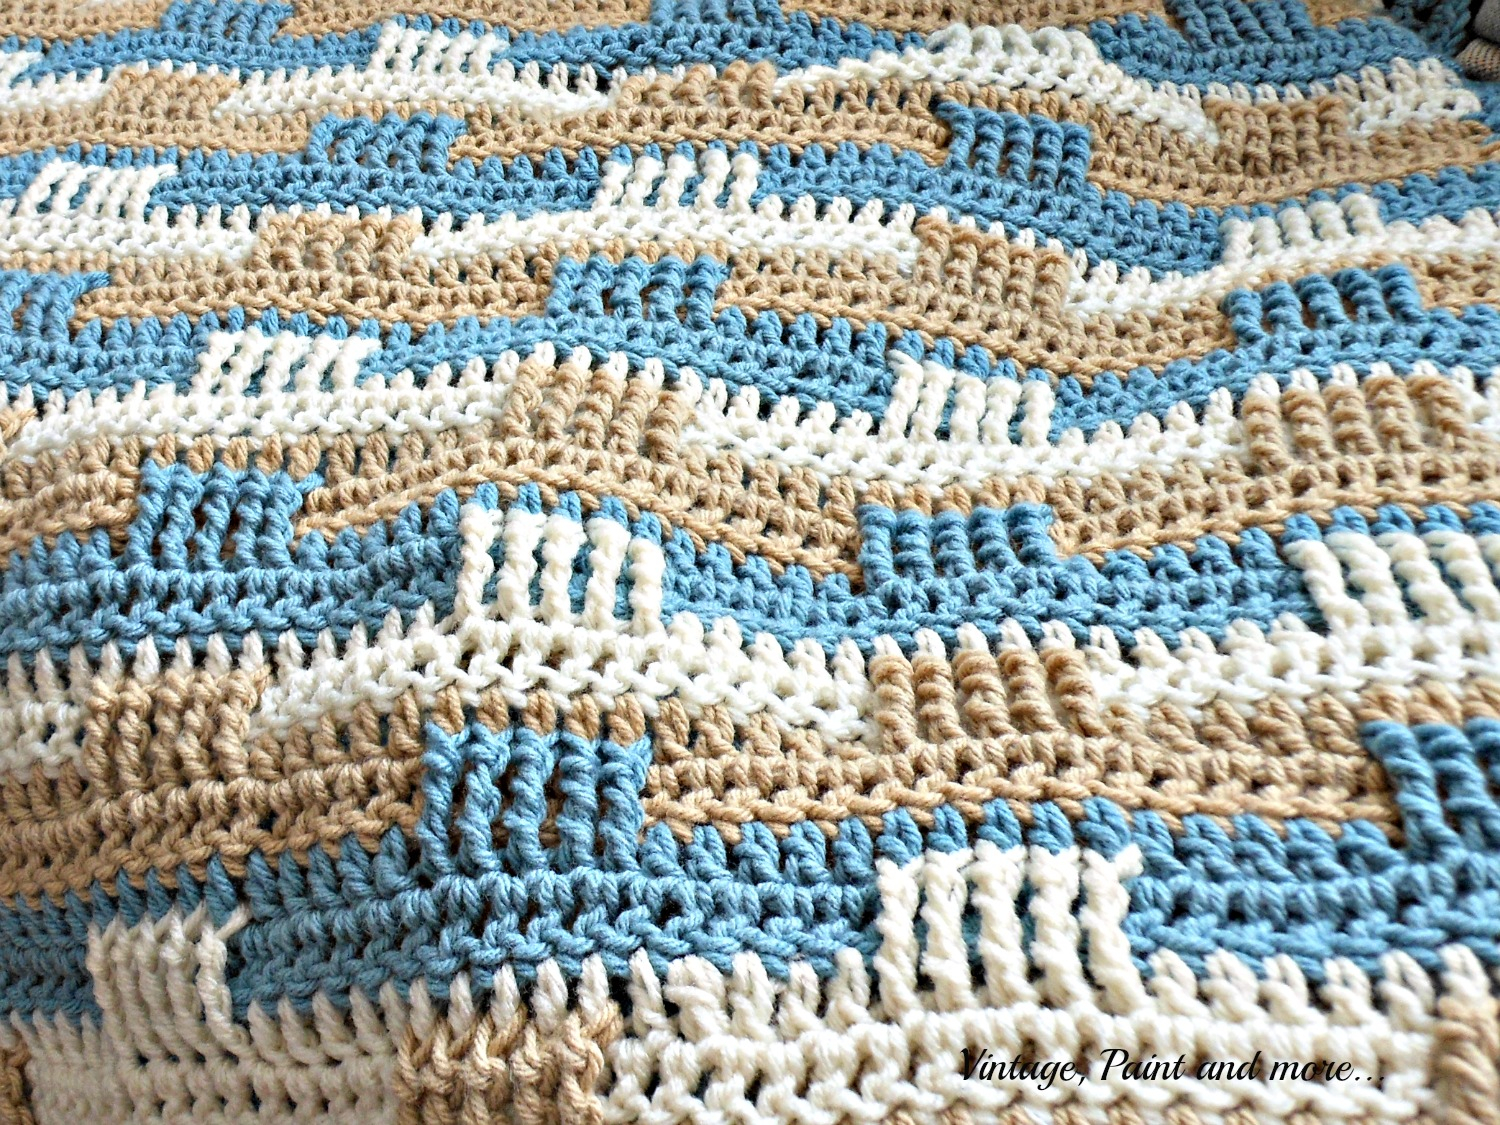 Basket Weave Crochet Pattern Crochet Afghan And Stenciled Pillow Vintage Paint And More